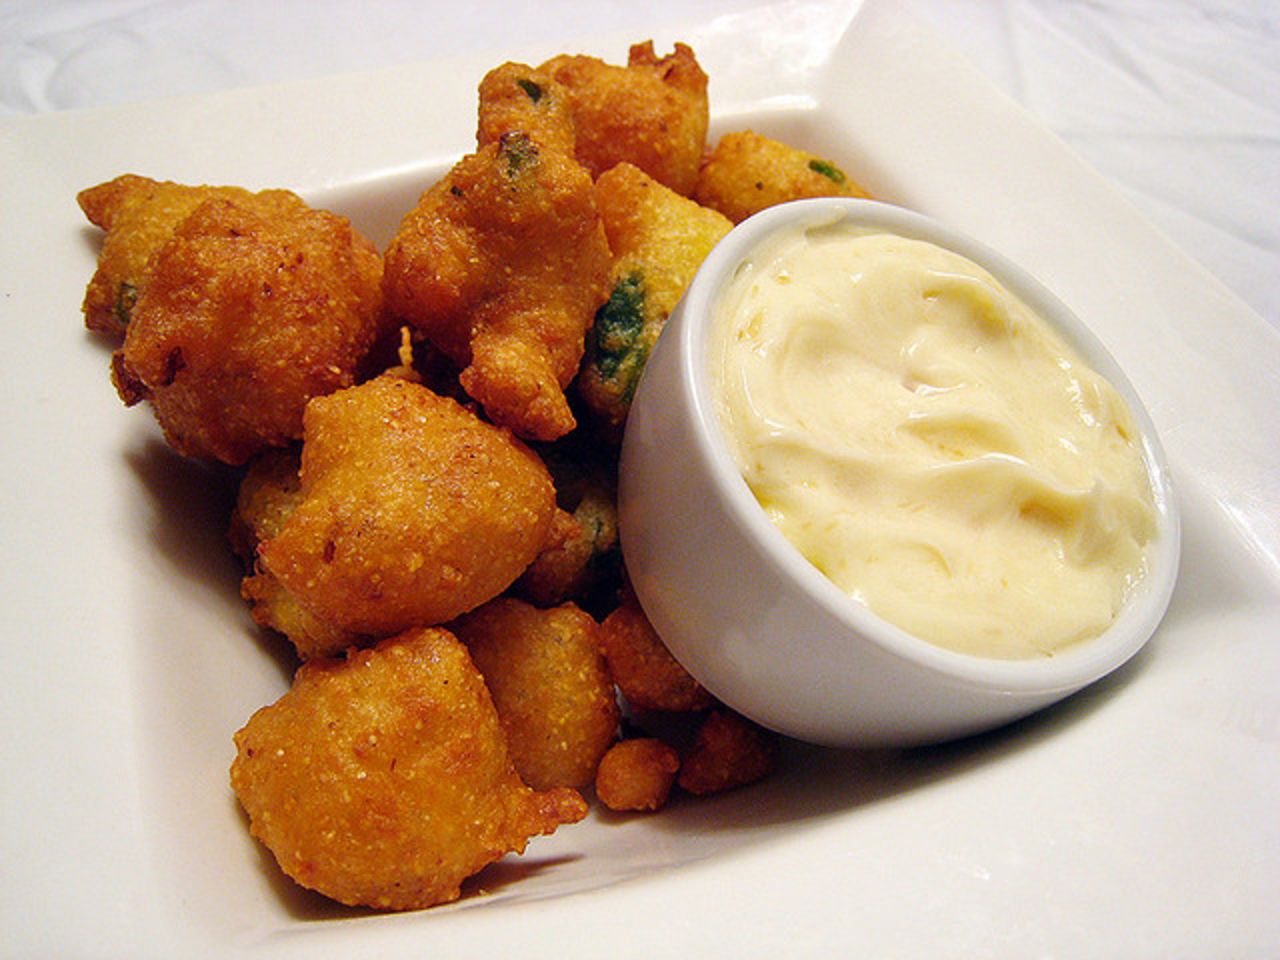 Jalapeno hush puppies are among the imaginative dishes at Dirty Candy in New York.  